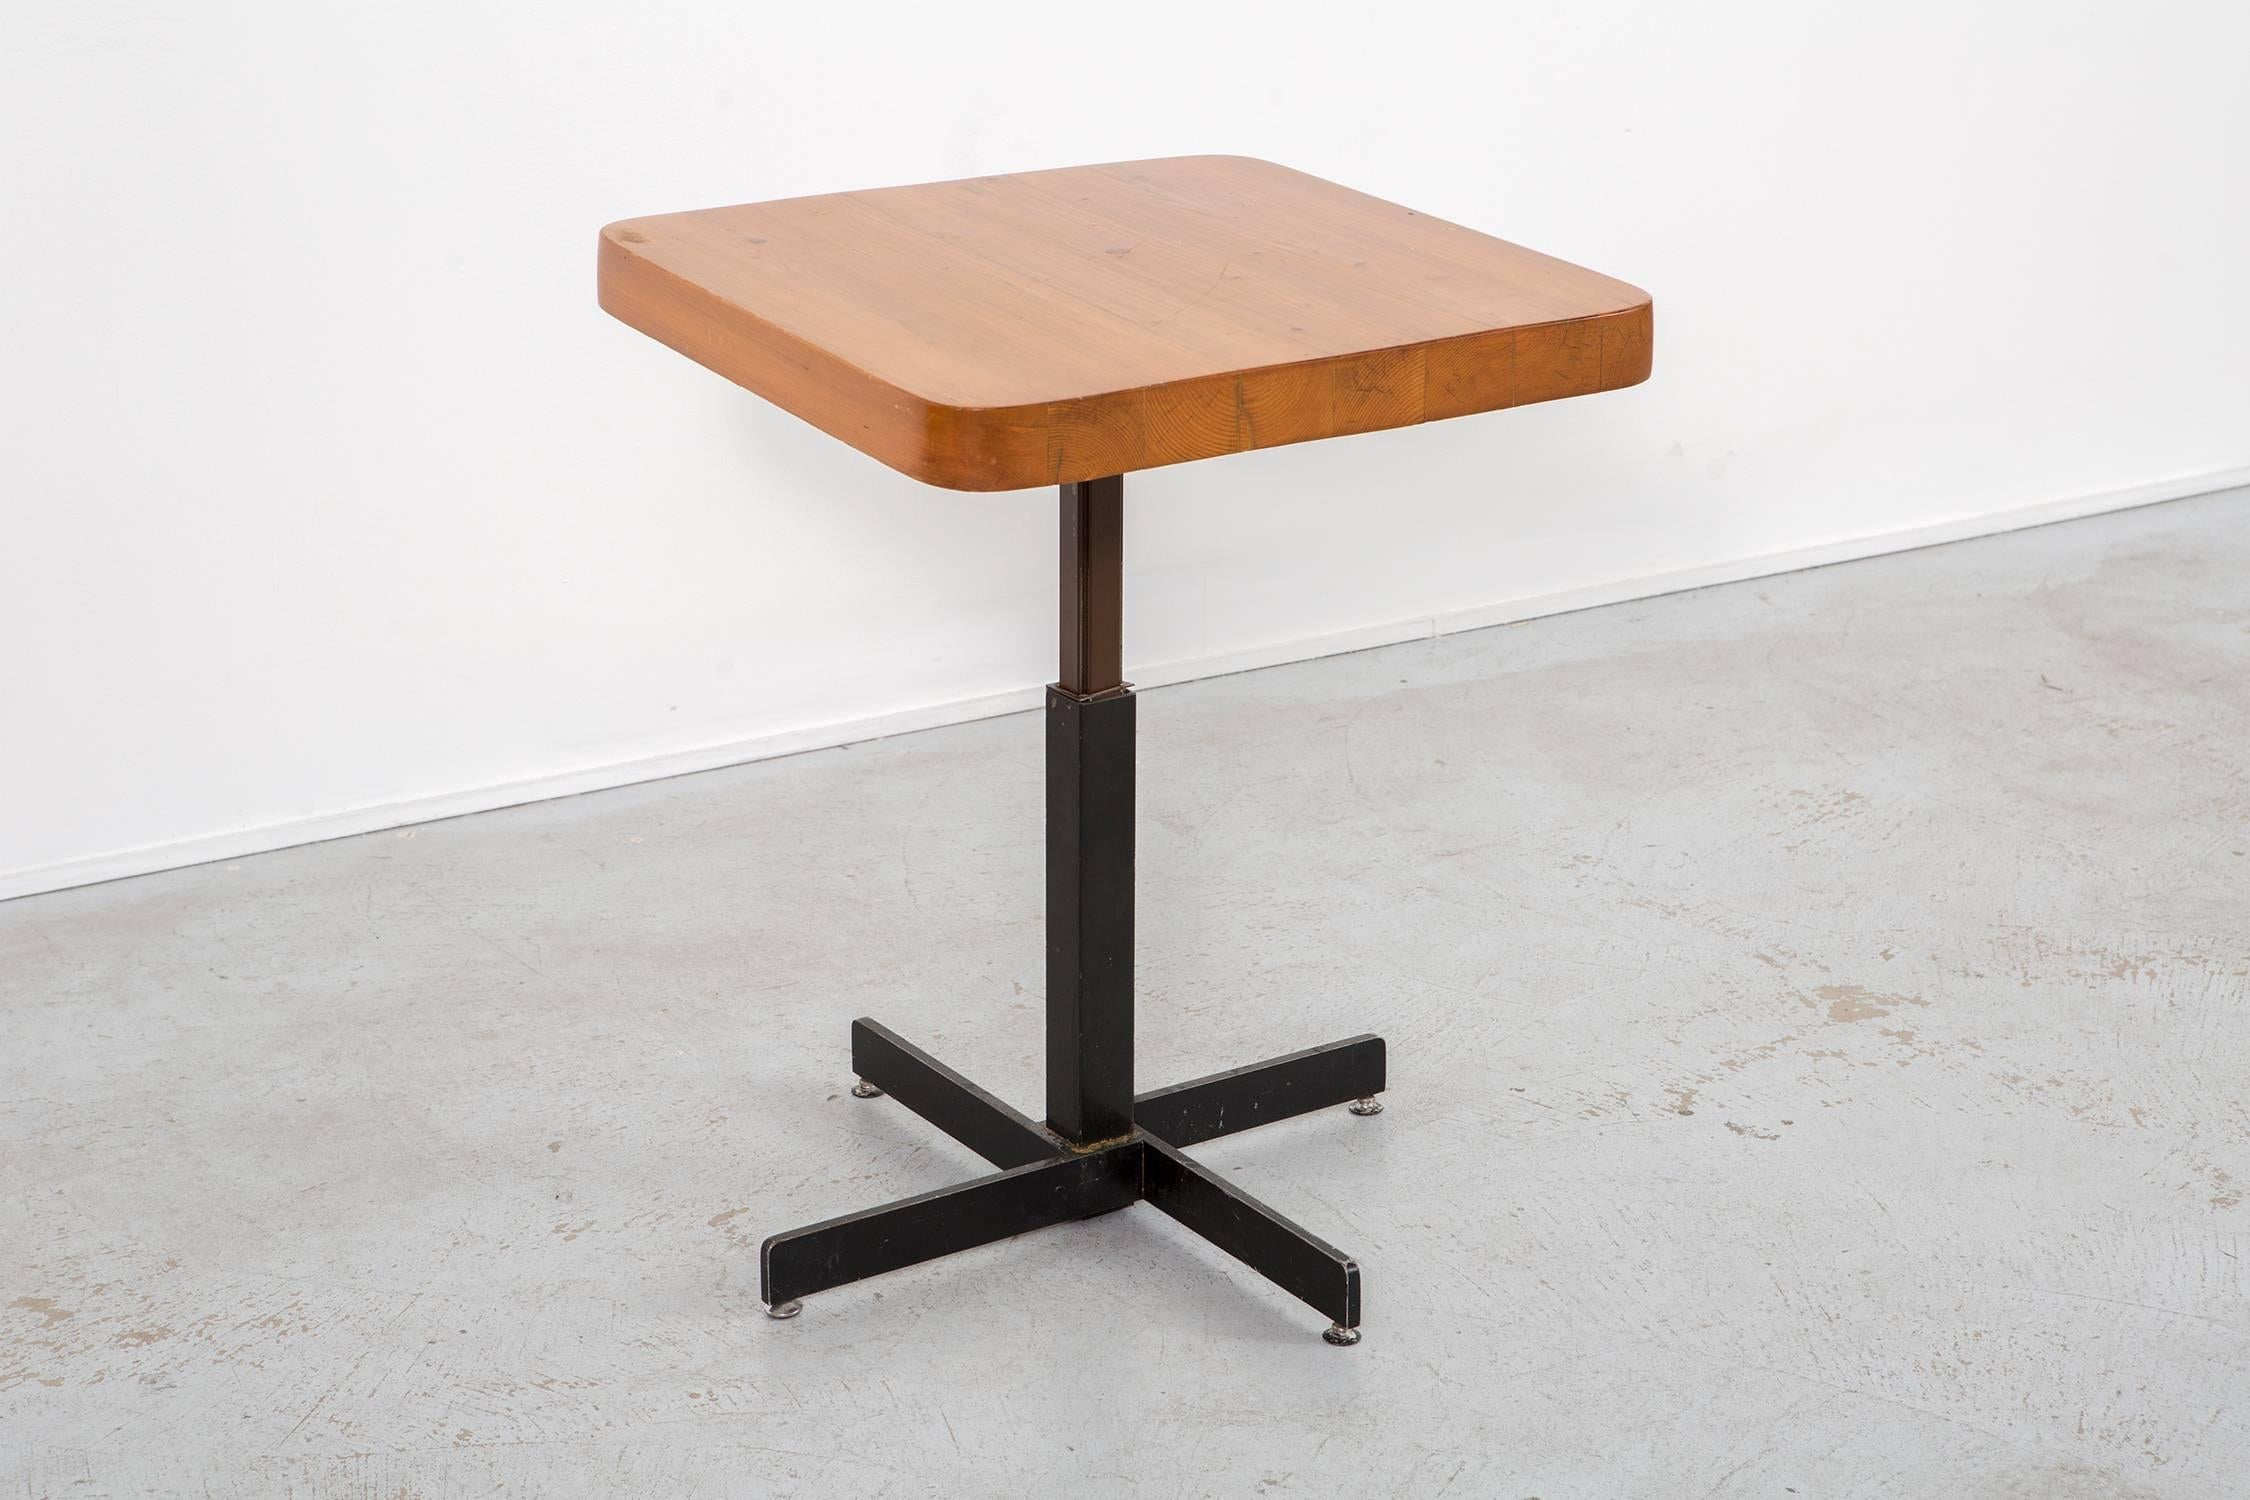 Square table

Designed by Charlotte Perriand for Les Arcs 2000

France, circa 1968

Enameled steel and pine

Measures: 29 ?” H x 23 ½” W x 22 ¾” D

Table height can be adjusted; this particular form was utilized in many Les Arcs residences